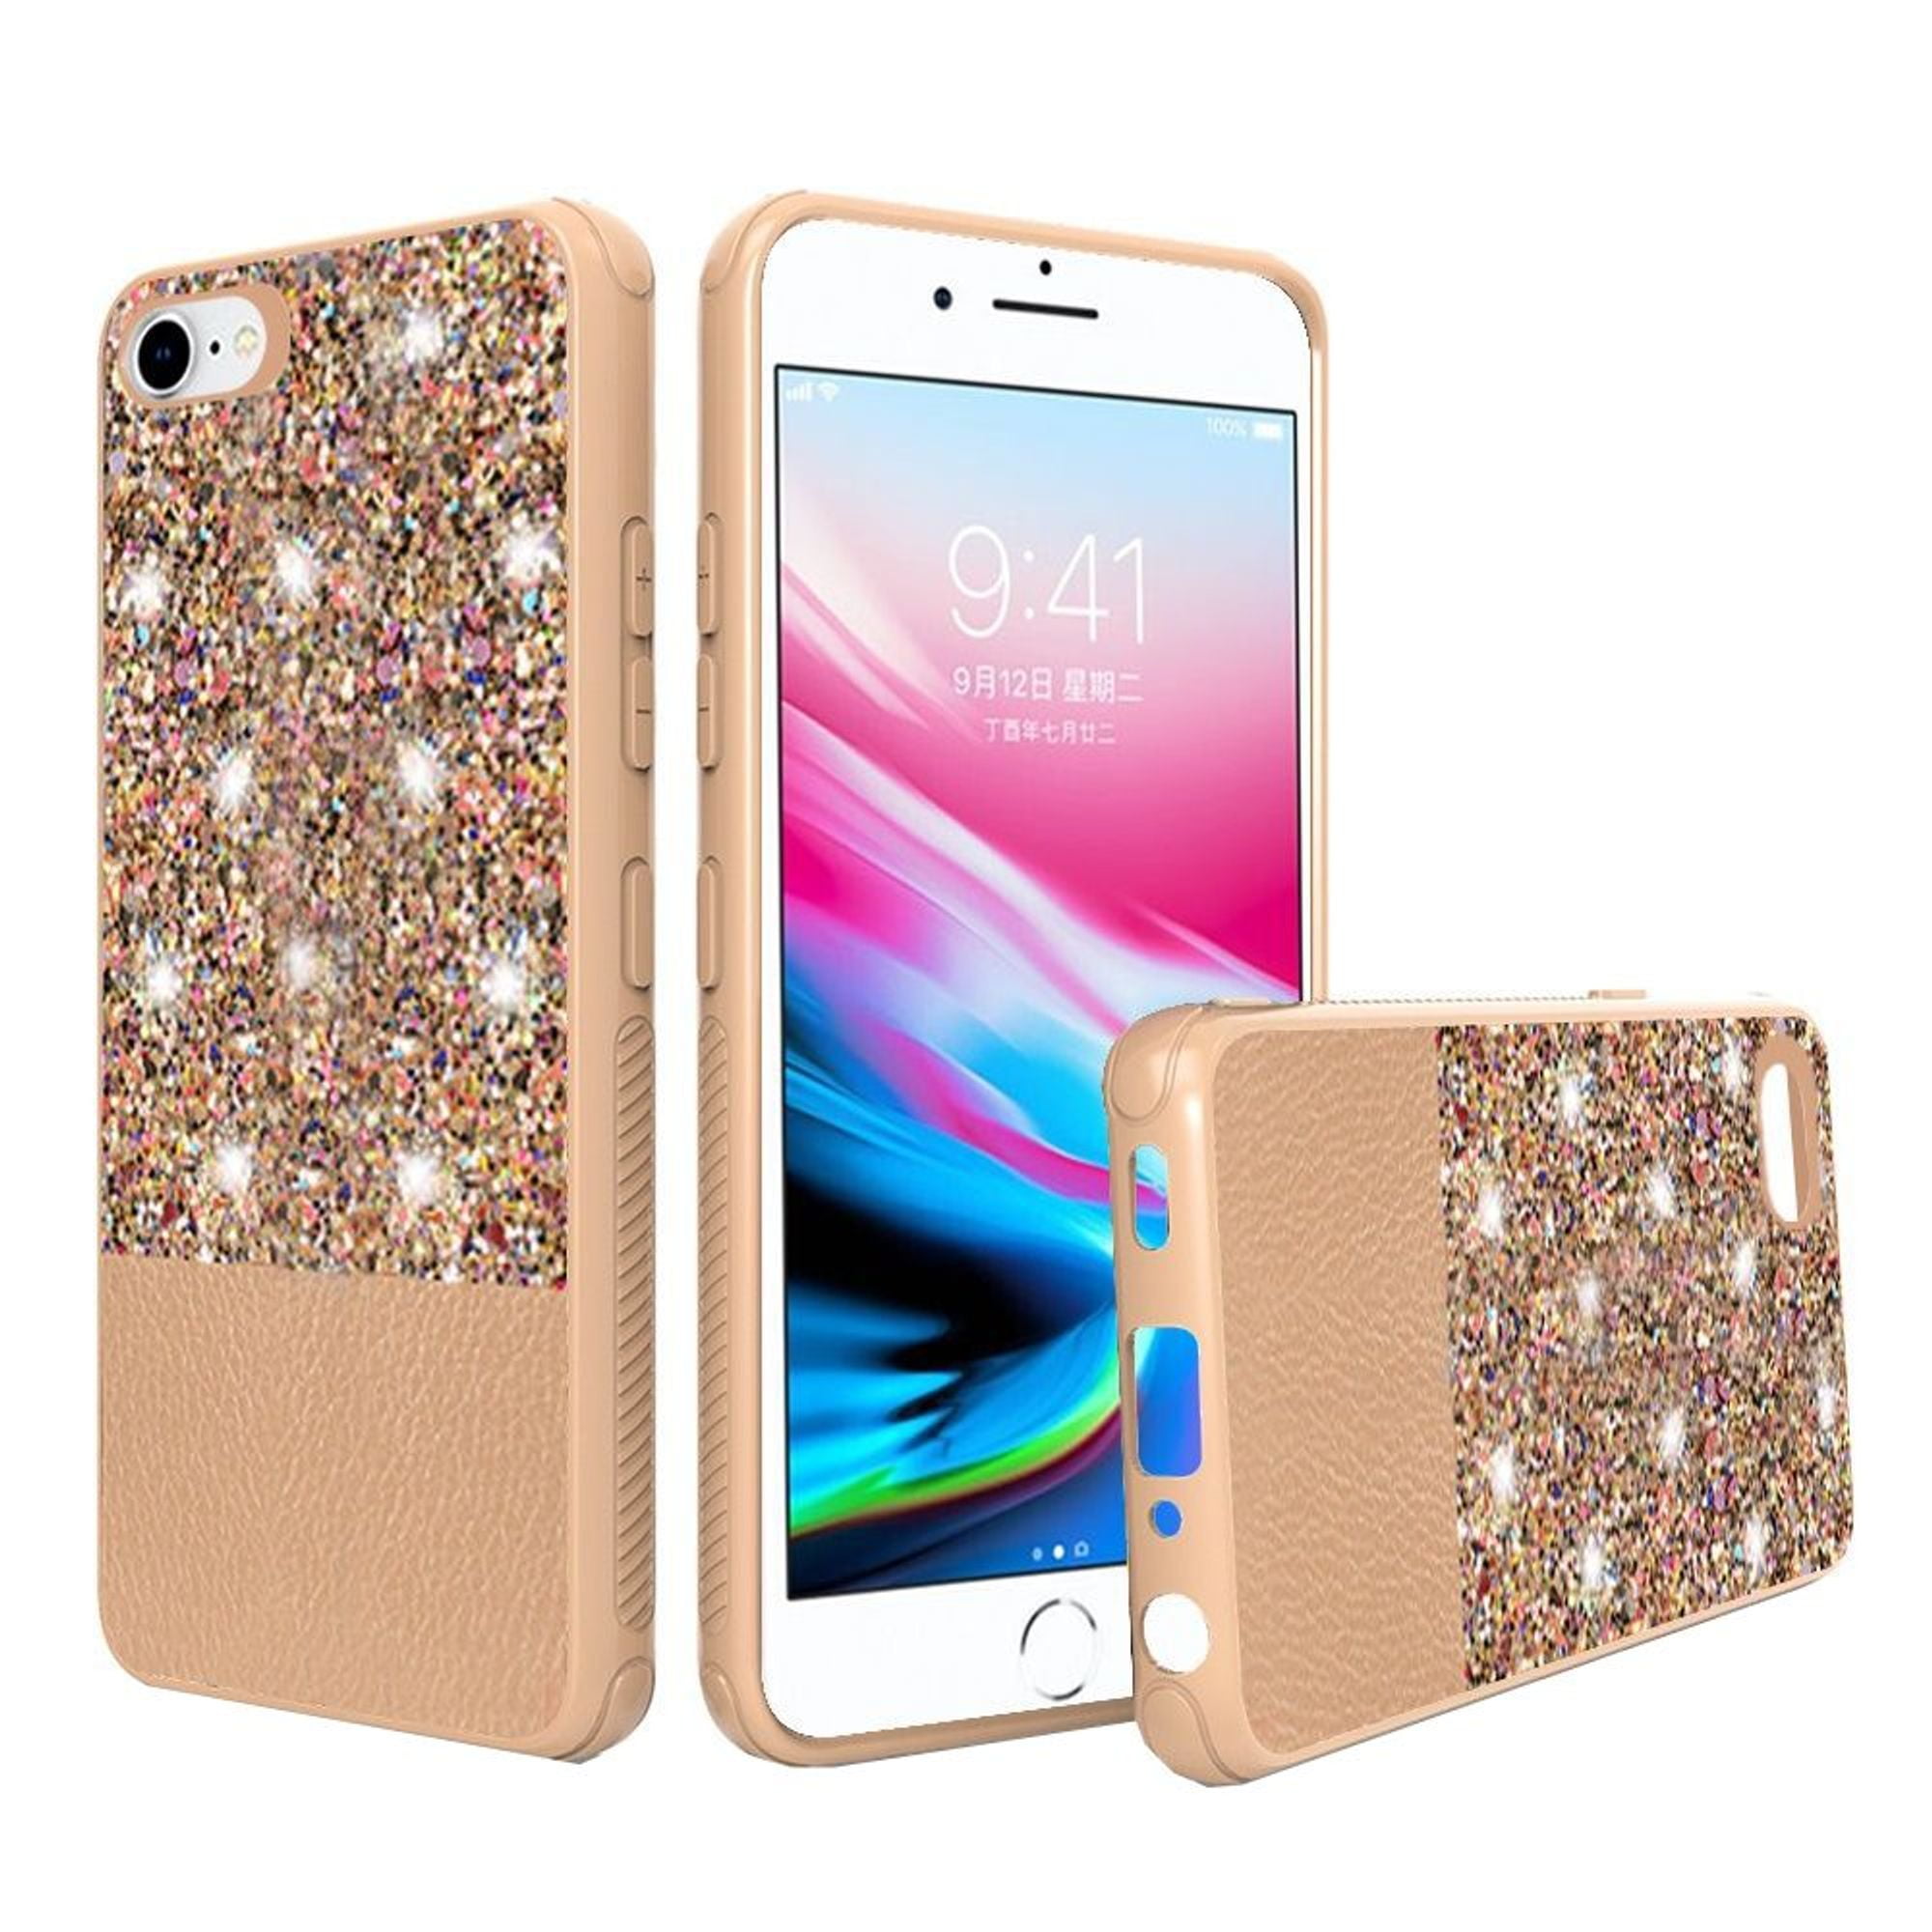 for-apple-iphone-7-8-case-by-insten-pu-leather-glitter-hard-plastic